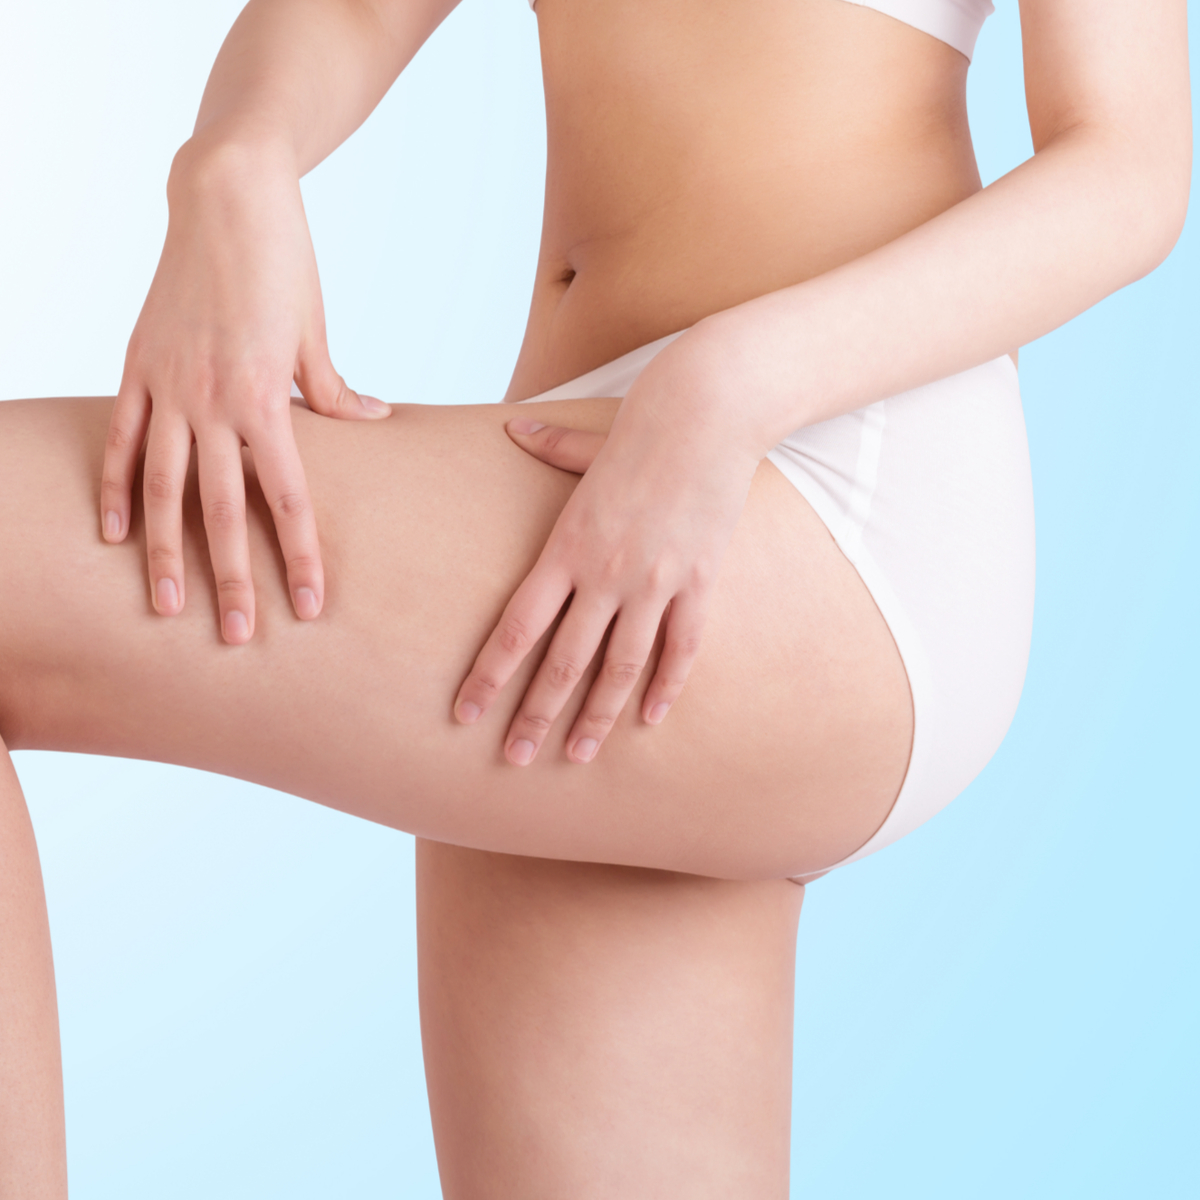 What is a Thigh Lift?